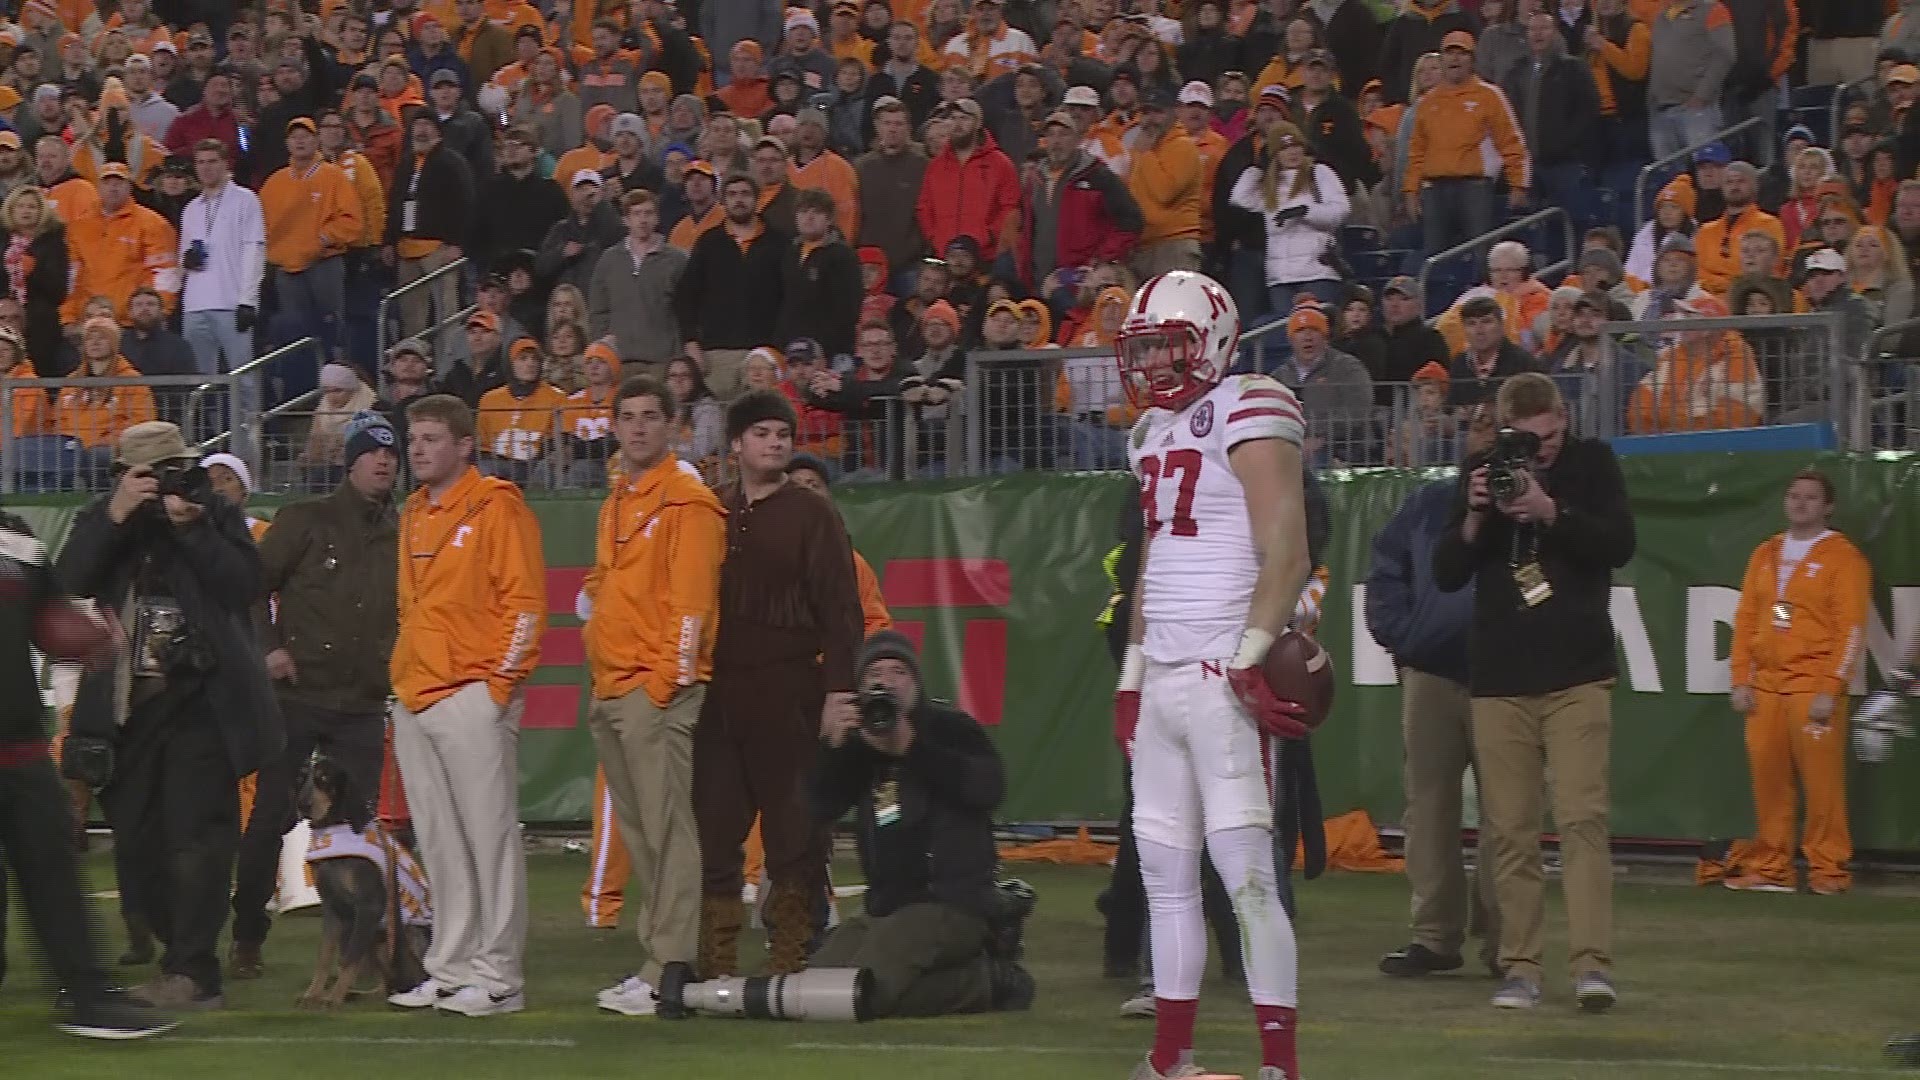 Watch the best plays from the Vols' Music City Bowl win over Nebraska.